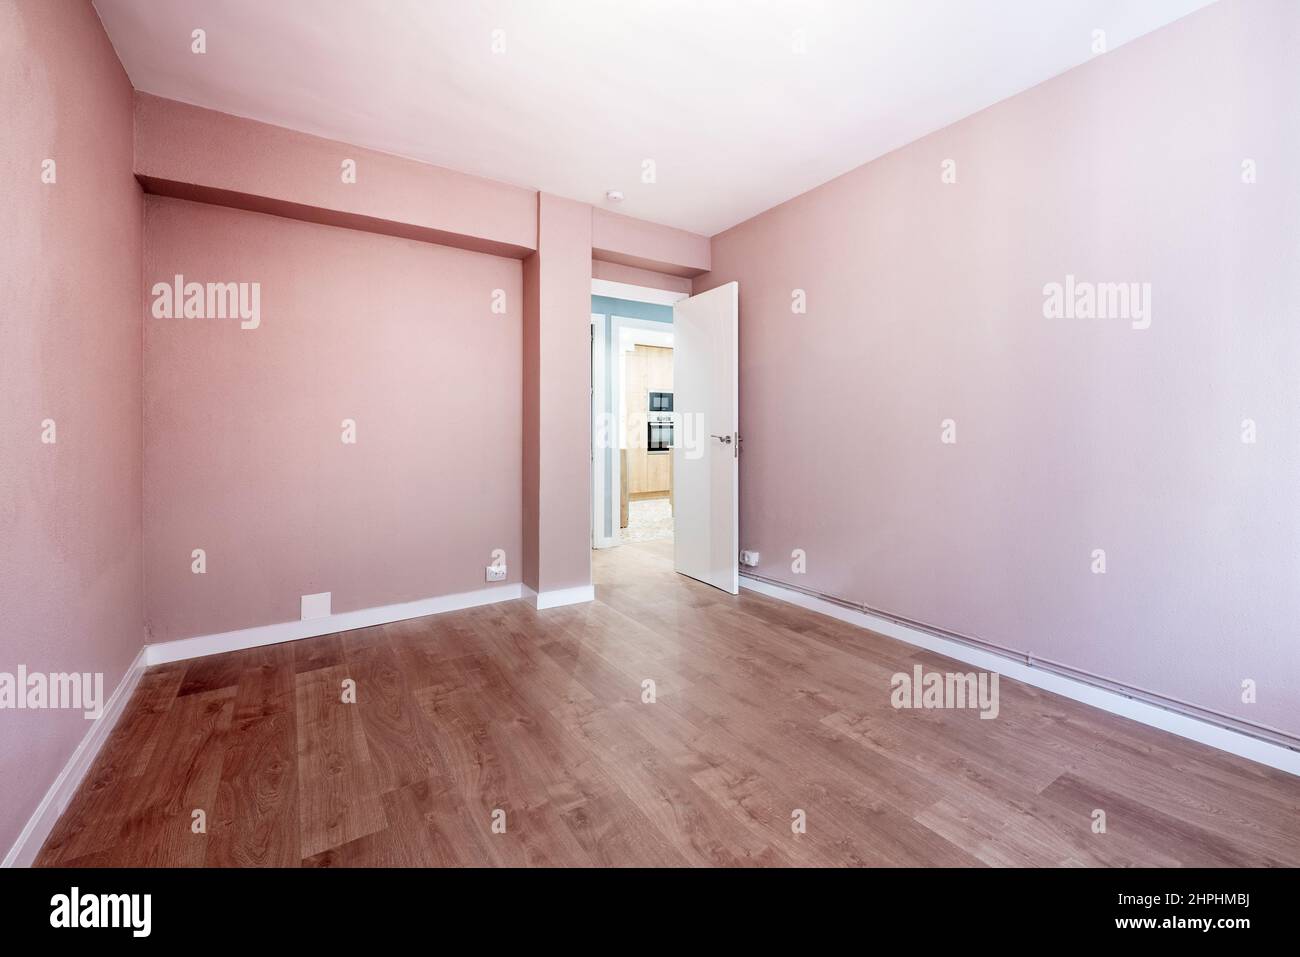 Empty room painted with pastel pink paint, wooden floor, white wood carpentry and white wooden door Stock Photo